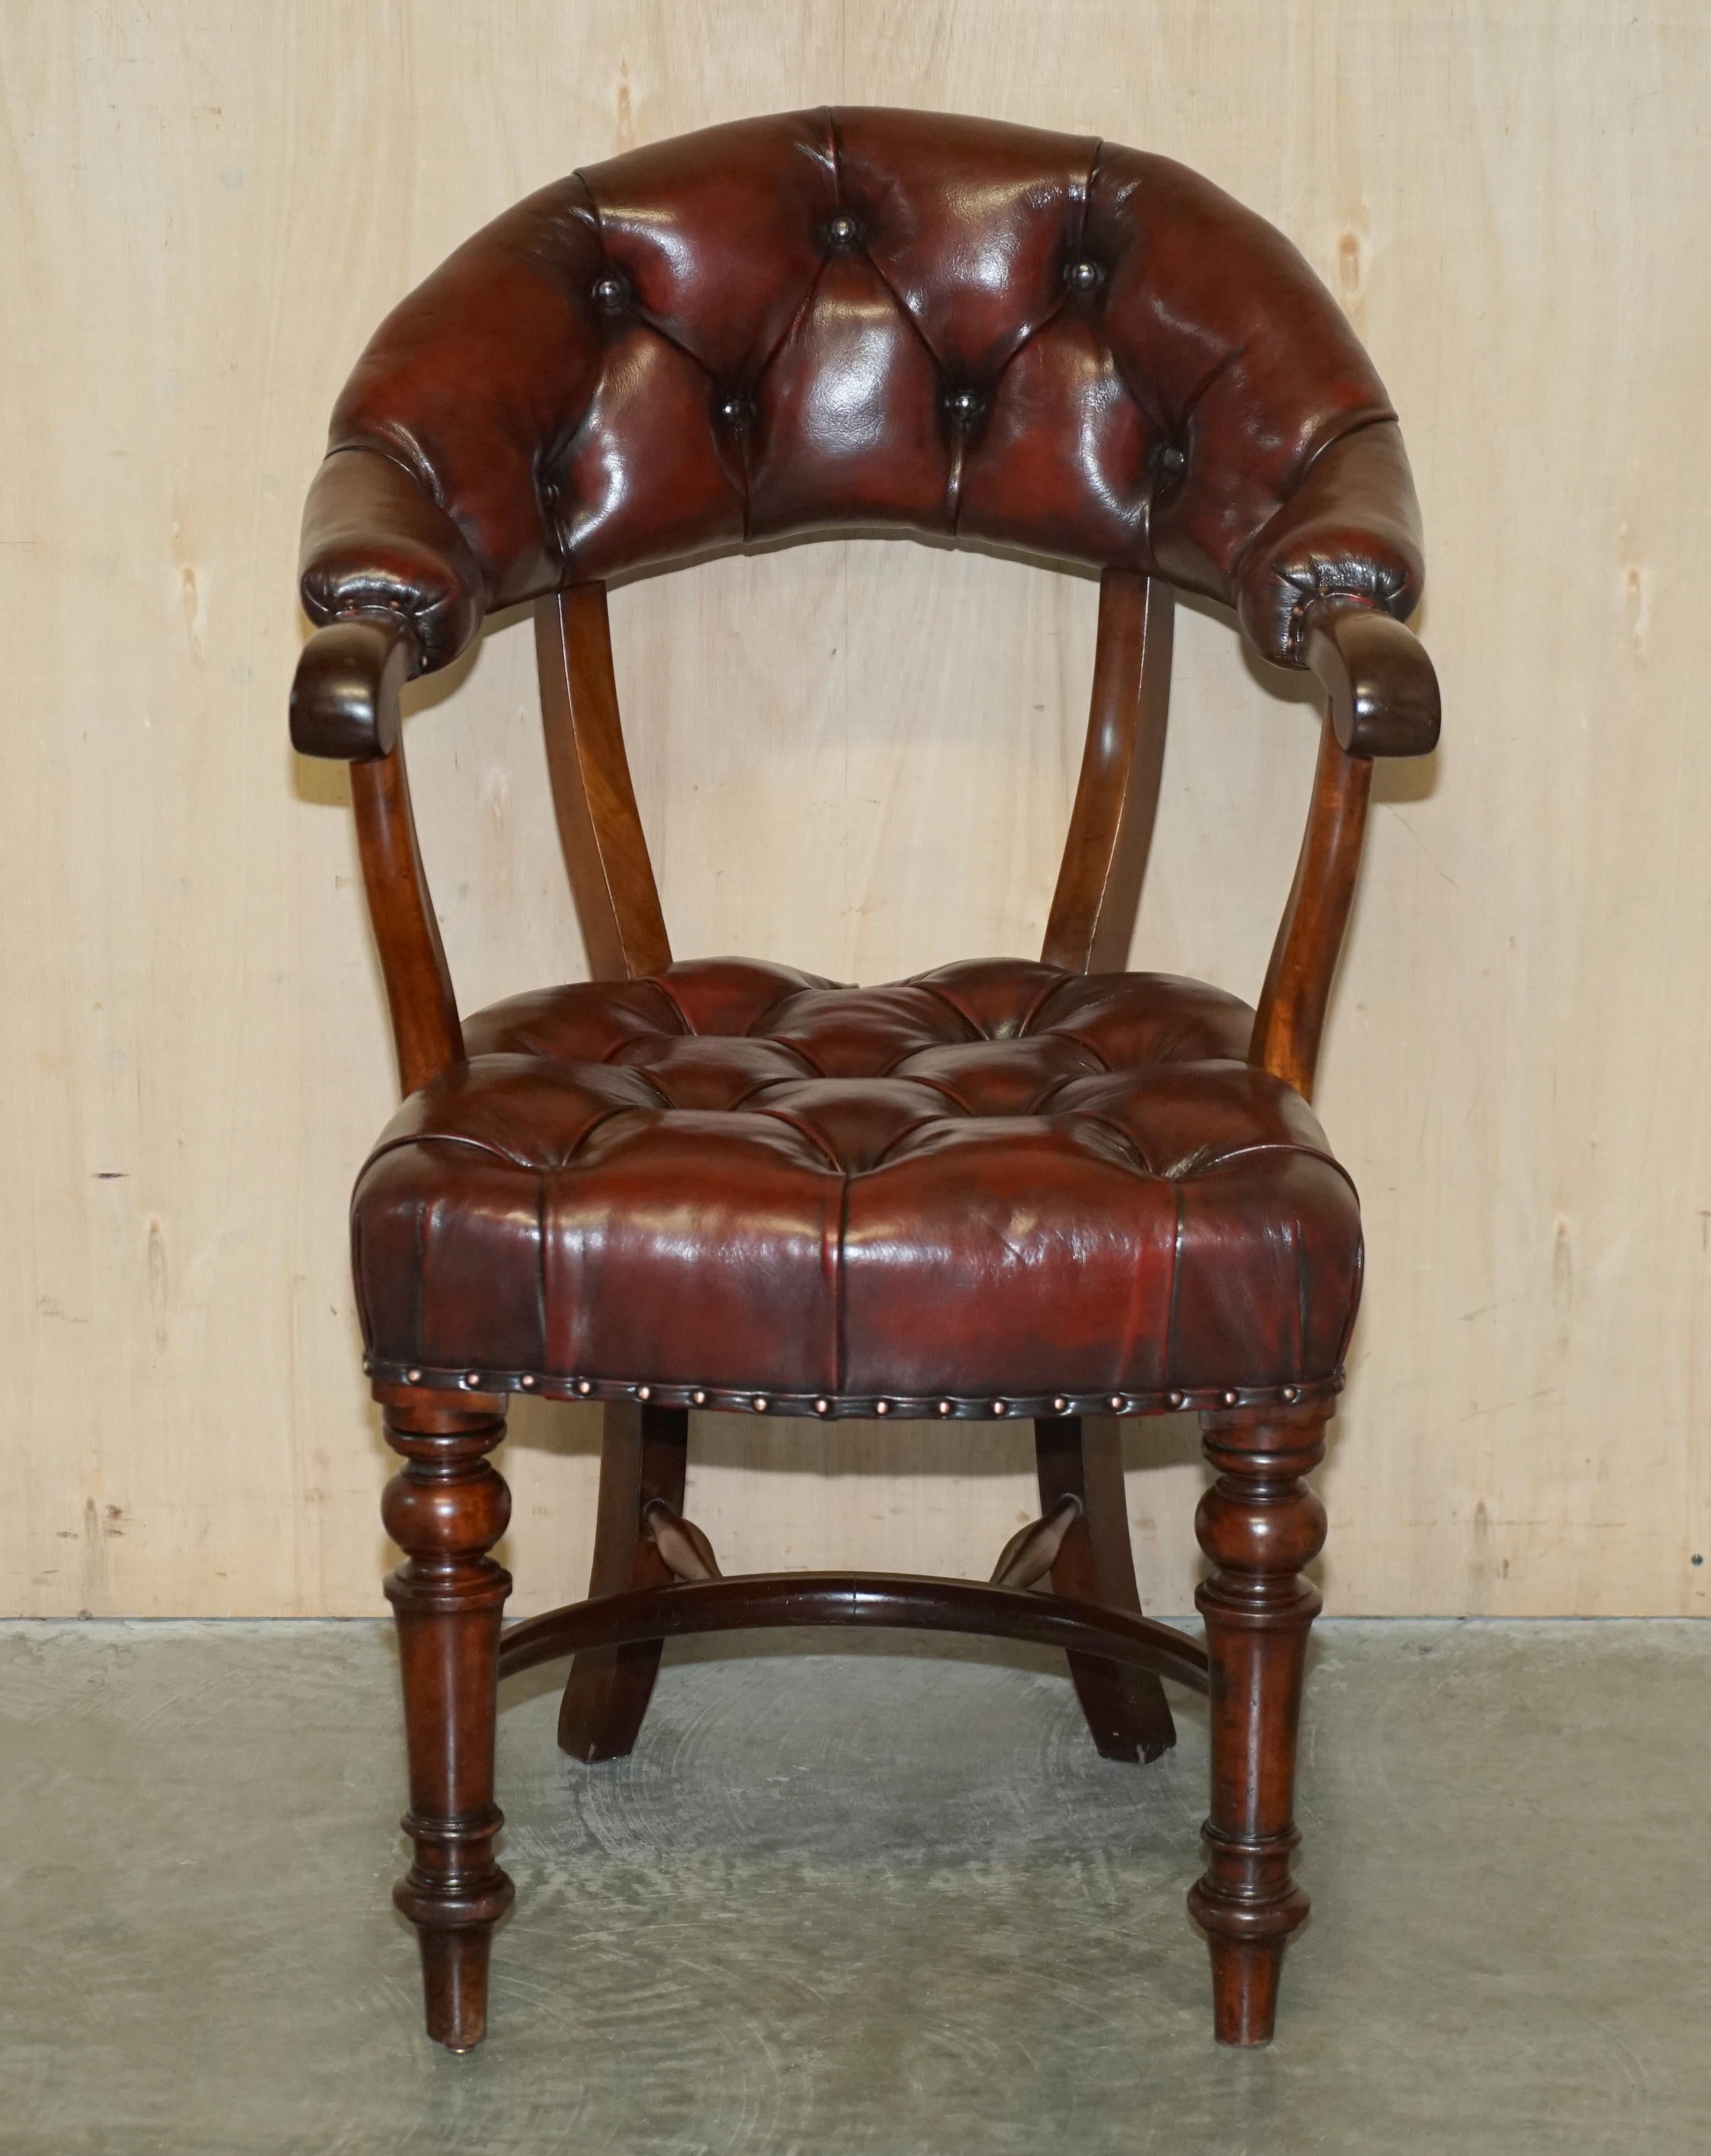 We are delighted to offer for sale this lovely, antique, fully restored original mahogany framed circa 1830 hand dyed Chesterfield Bordeaux leather director's chair.

Please note the delivery fee listed is just a guide, it covers within the M25